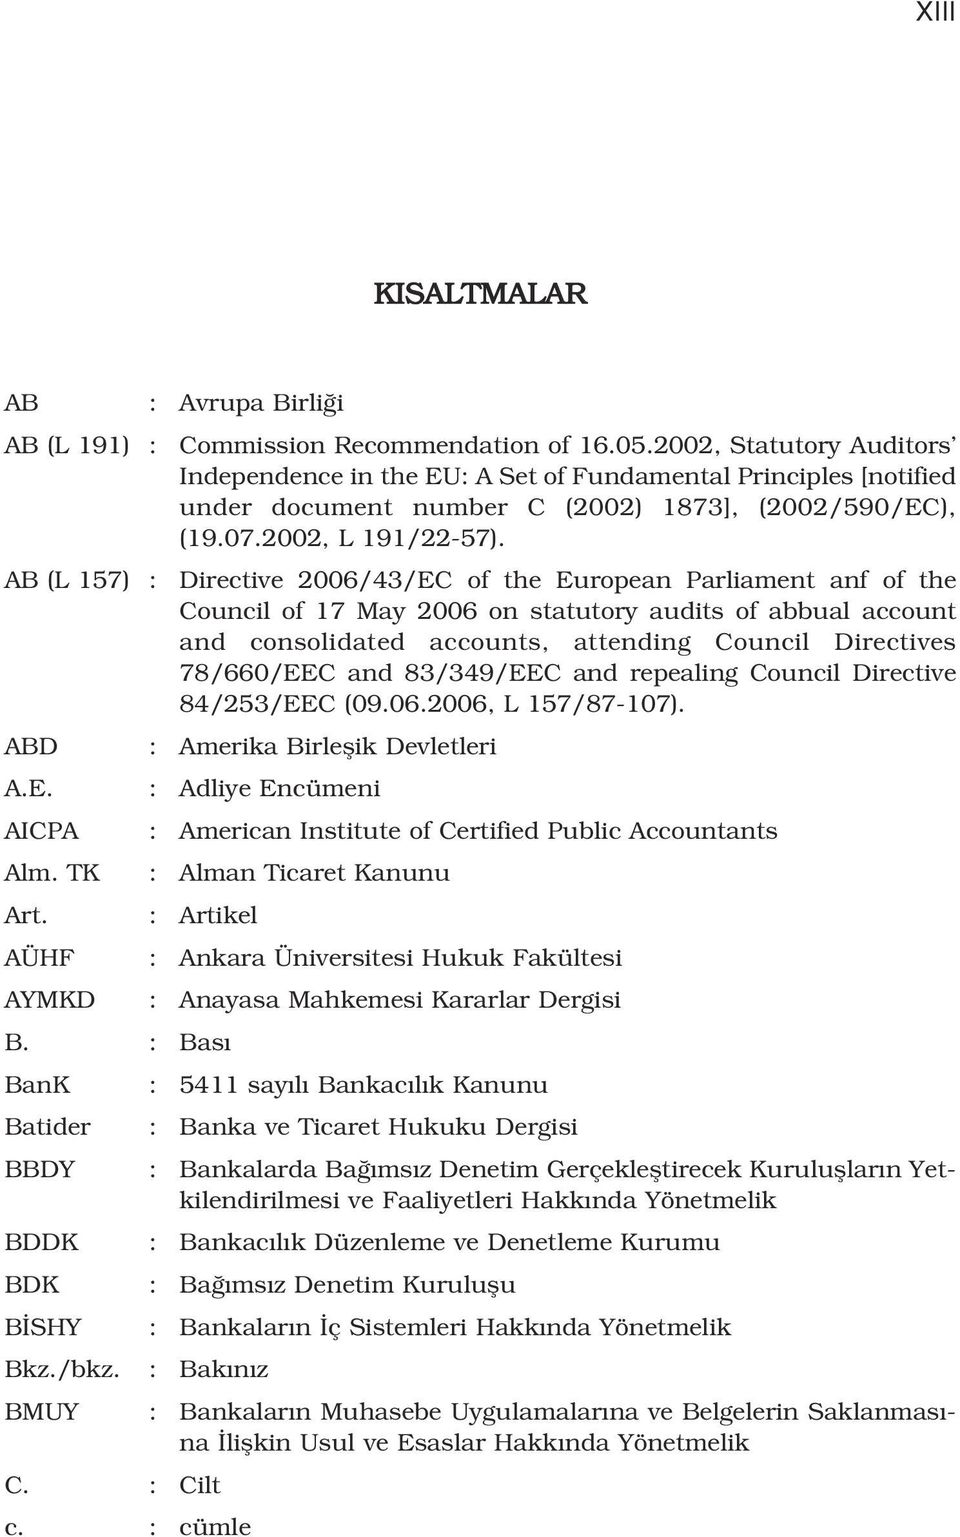 AB (L 157) : Directive 2006/43/EC of the European Parliament anf of the Council of 17 May 2006 on statutory audits of abbual account and consolidated accounts, attending Council Directives 78/660/EEC